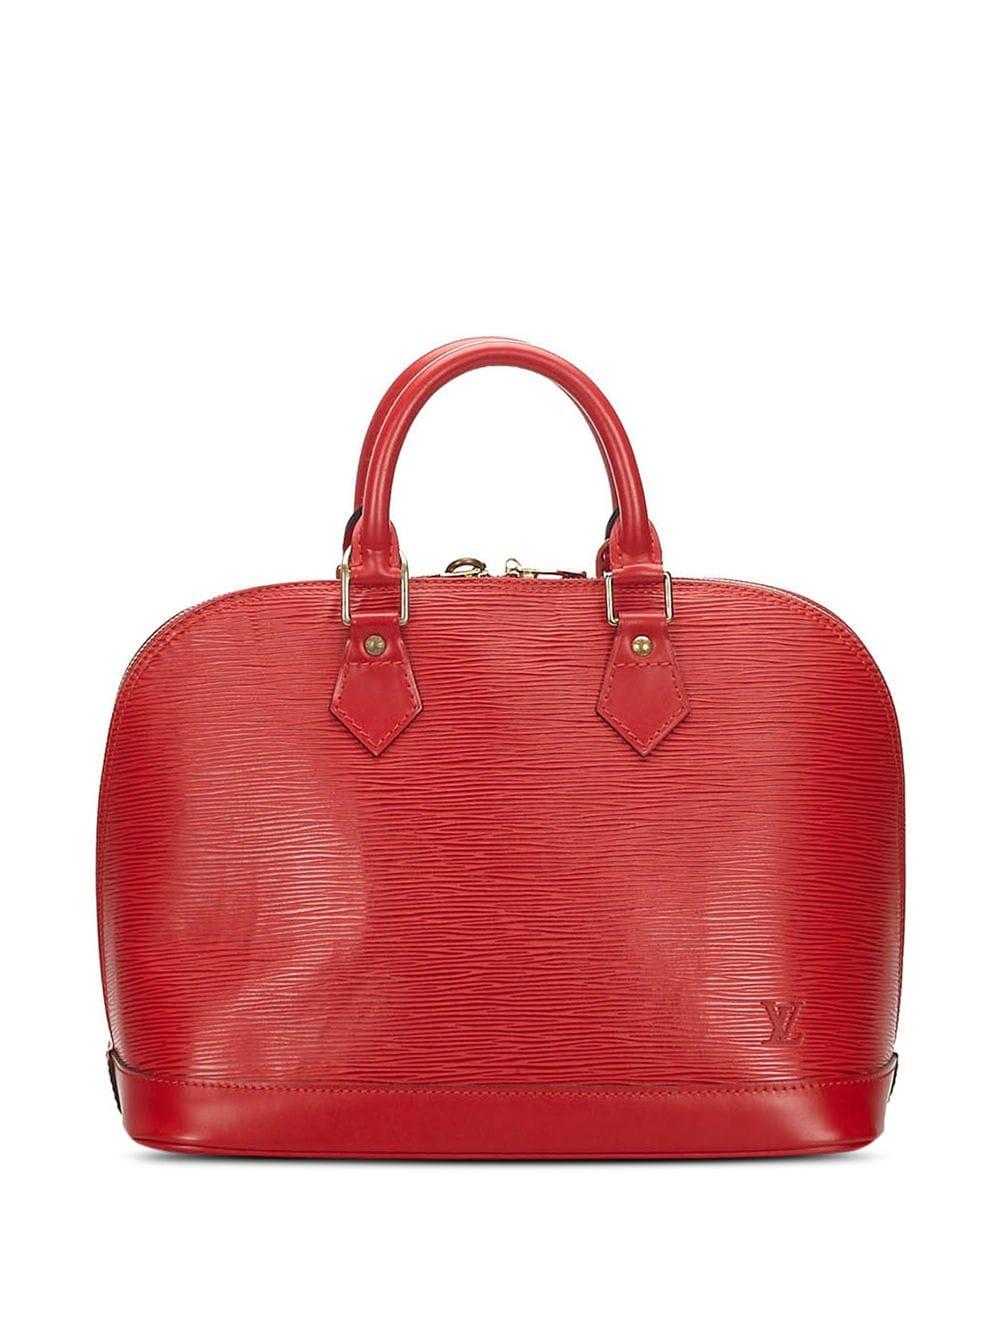 Louis Vuitton Leather 1996 Pre-owned Alma Epi Pm Tote in Red - Lyst